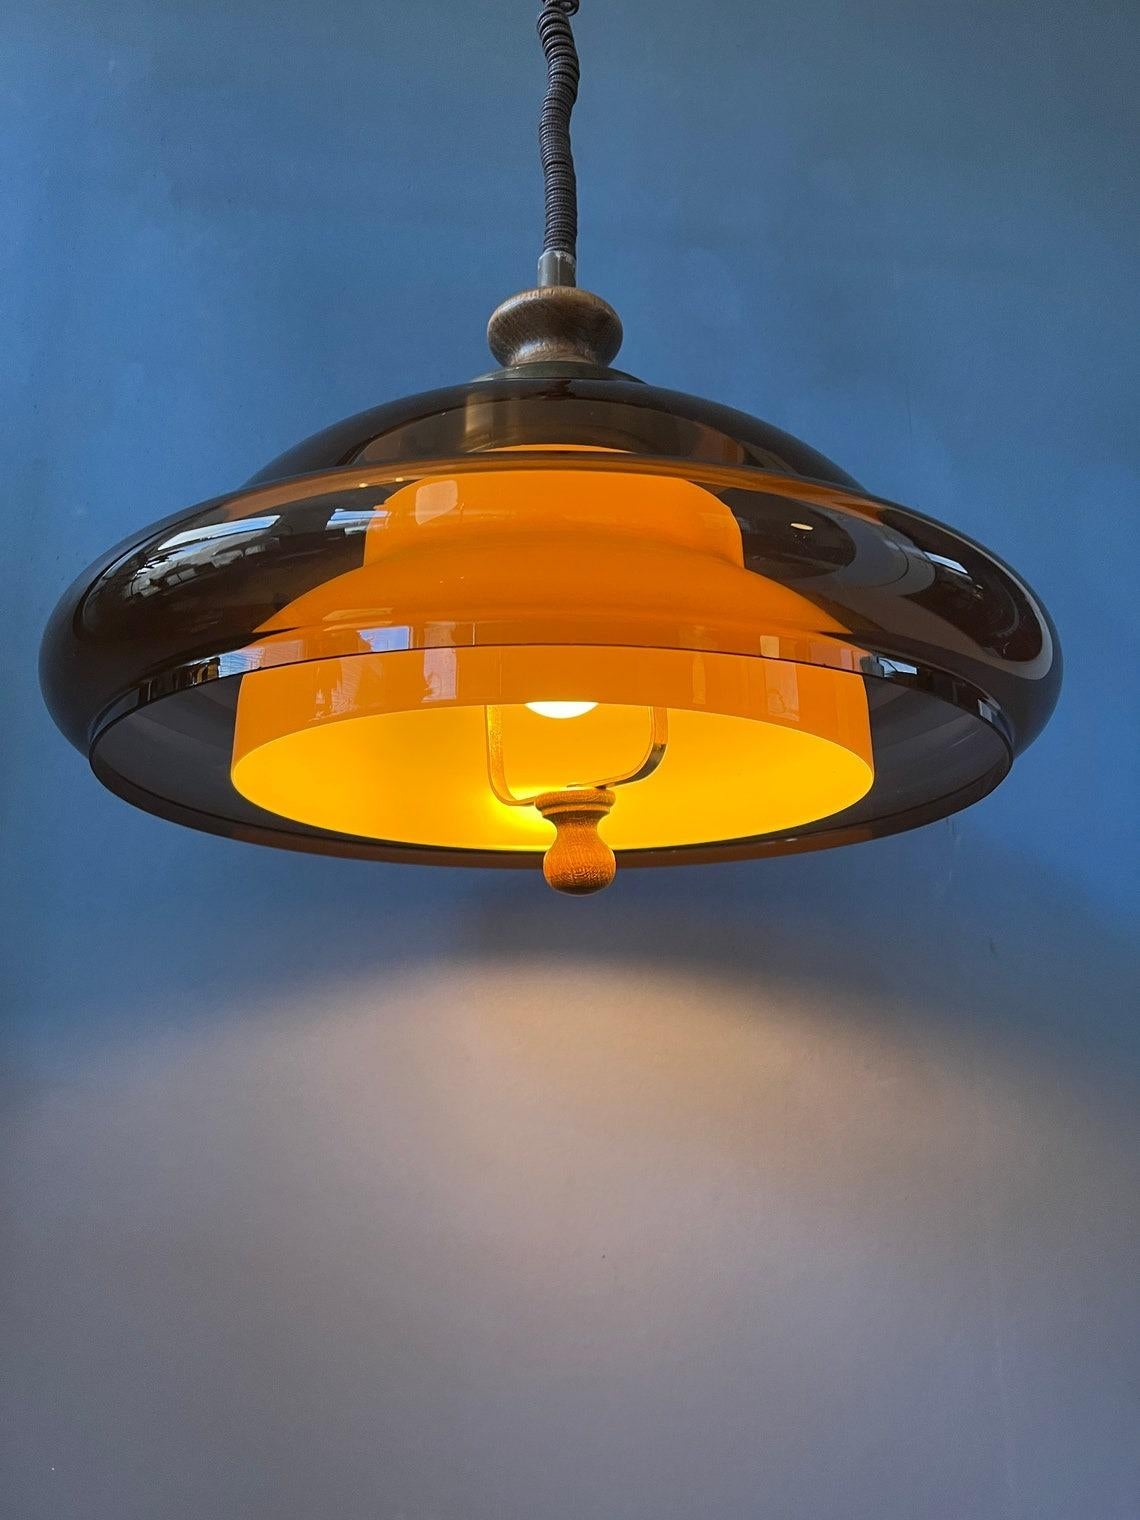 A double shaded space age pendant, presumably by Herda or Dijkstra. The lamp produces a classy light with its transparent outer shade and beige inner shade. The height of the lamp can easily be adjusted with the rise and fall mechanism. The lamp